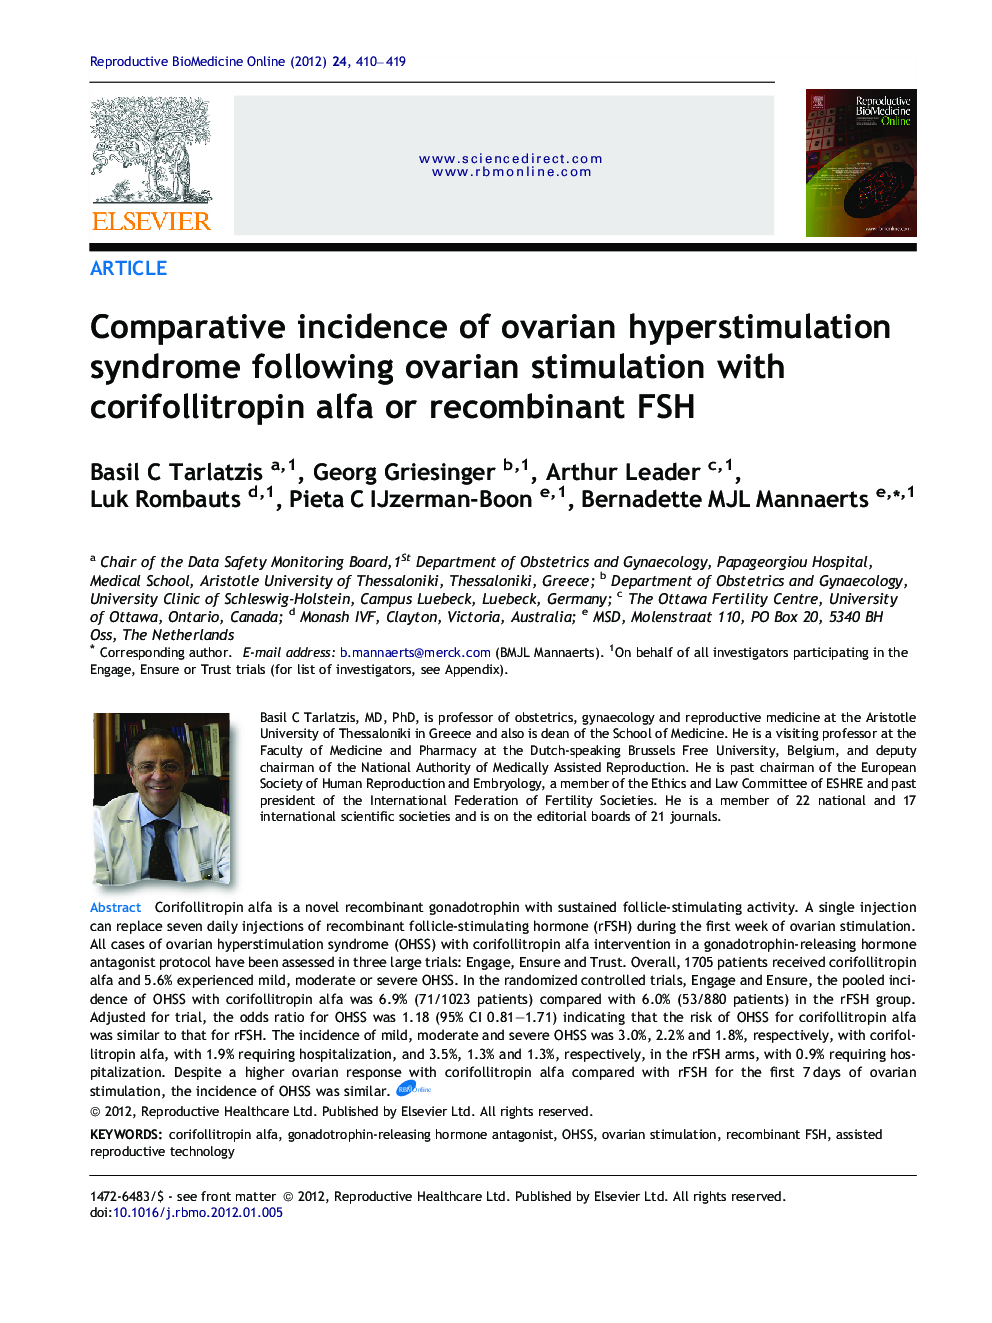 Comparative incidence of ovarian hyperstimulation syndrome following ovarian stimulation with corifollitropin alfa or recombinant FSH 